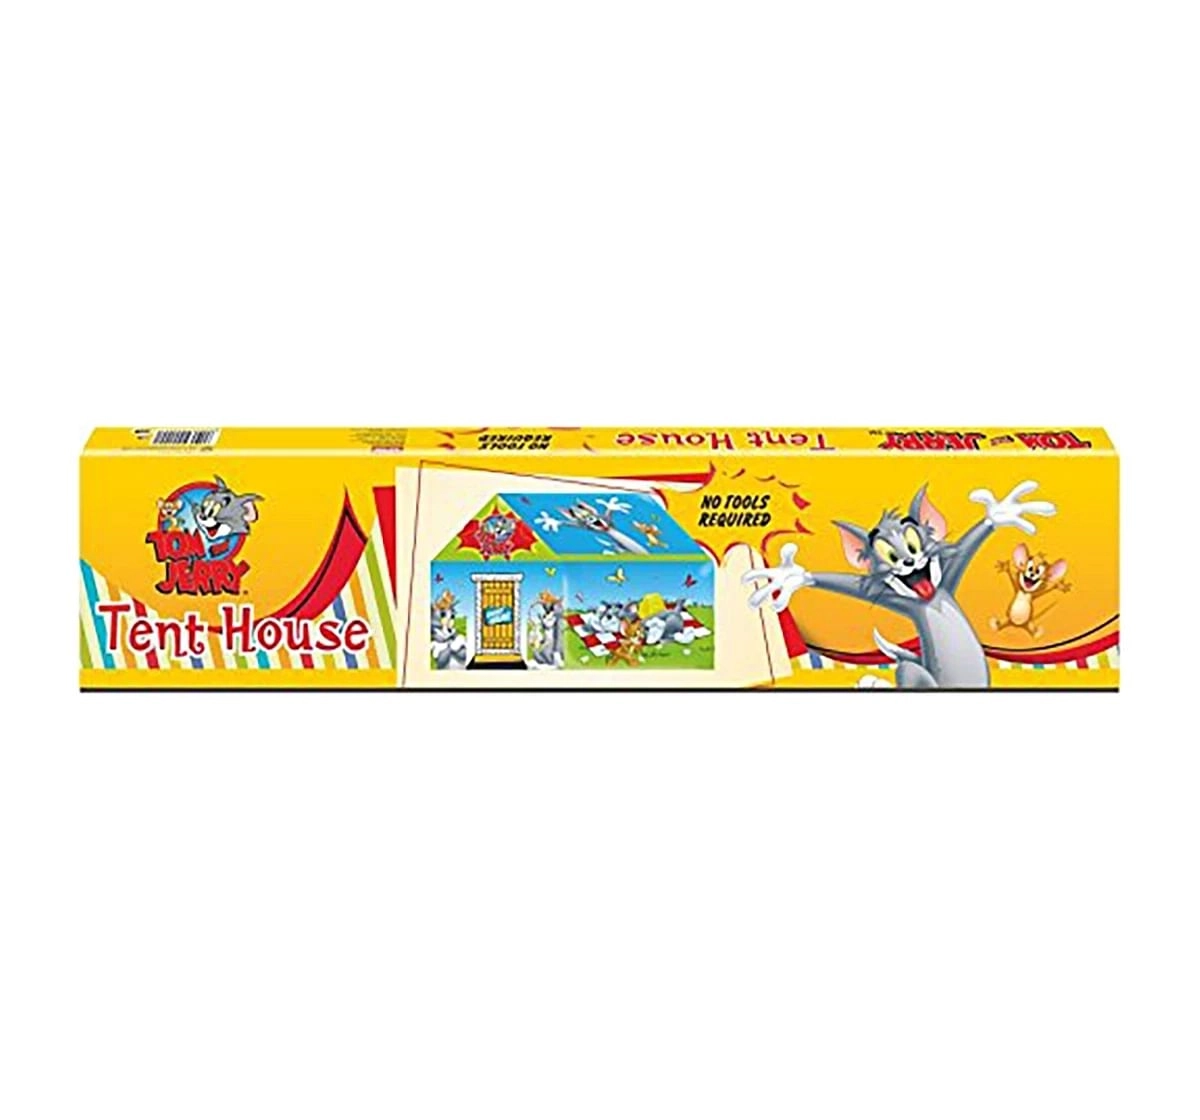 Webby Tom & Jerry Kids Play Tent Traking Multicolour 3Y+